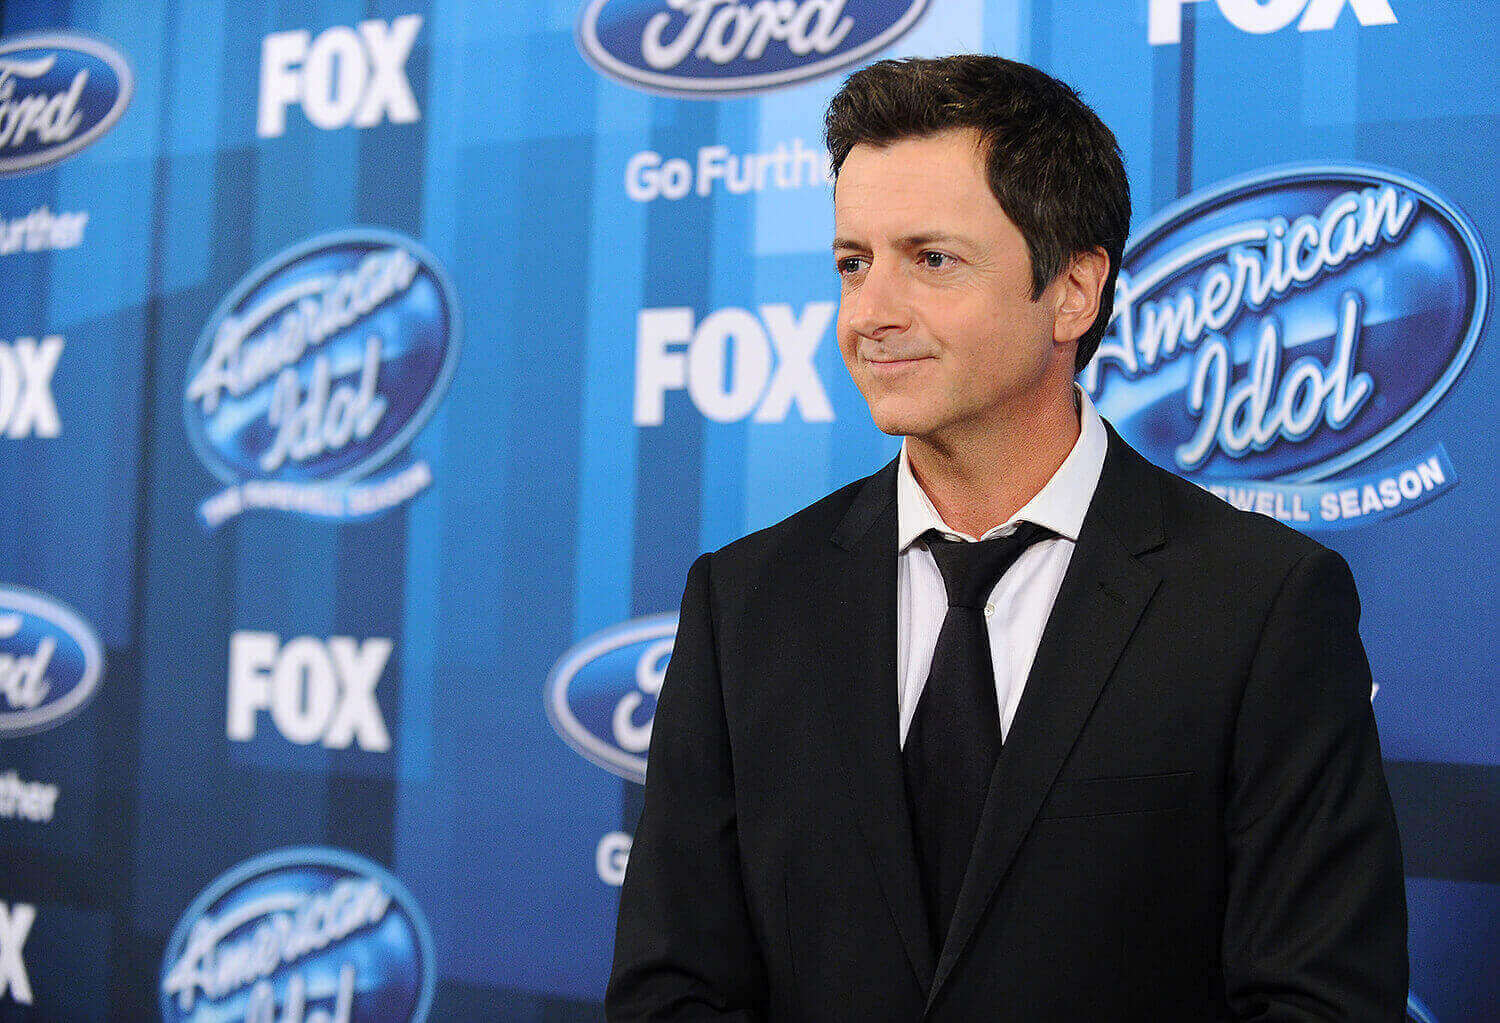 Brian Dunkleman attends the American Idol farewell episode in 2016.